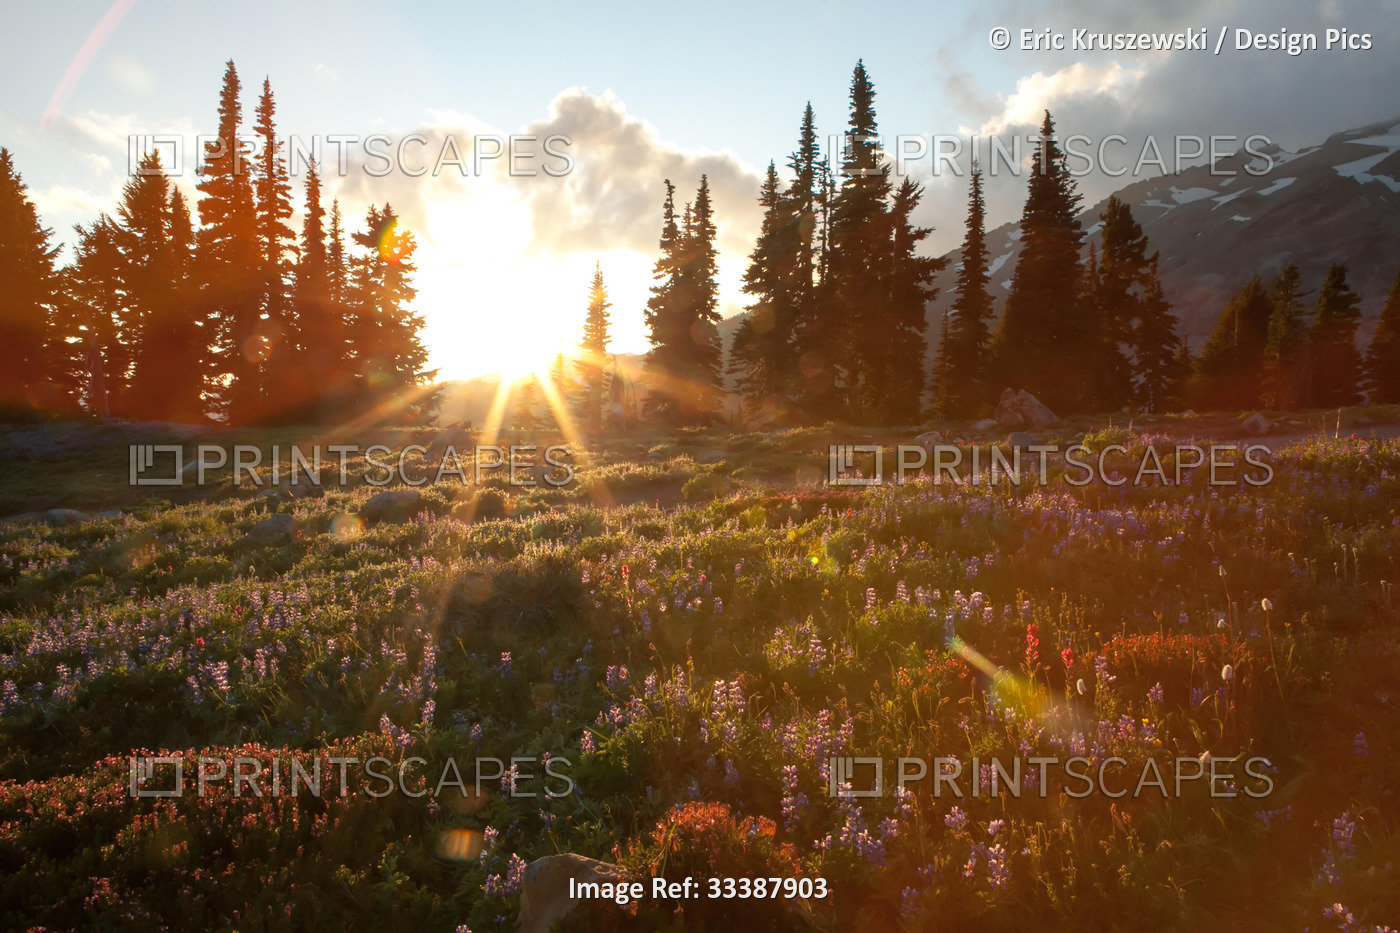 Wildflowers cover a landscape on Mount Rainier as the sun sets behind evergreen ...